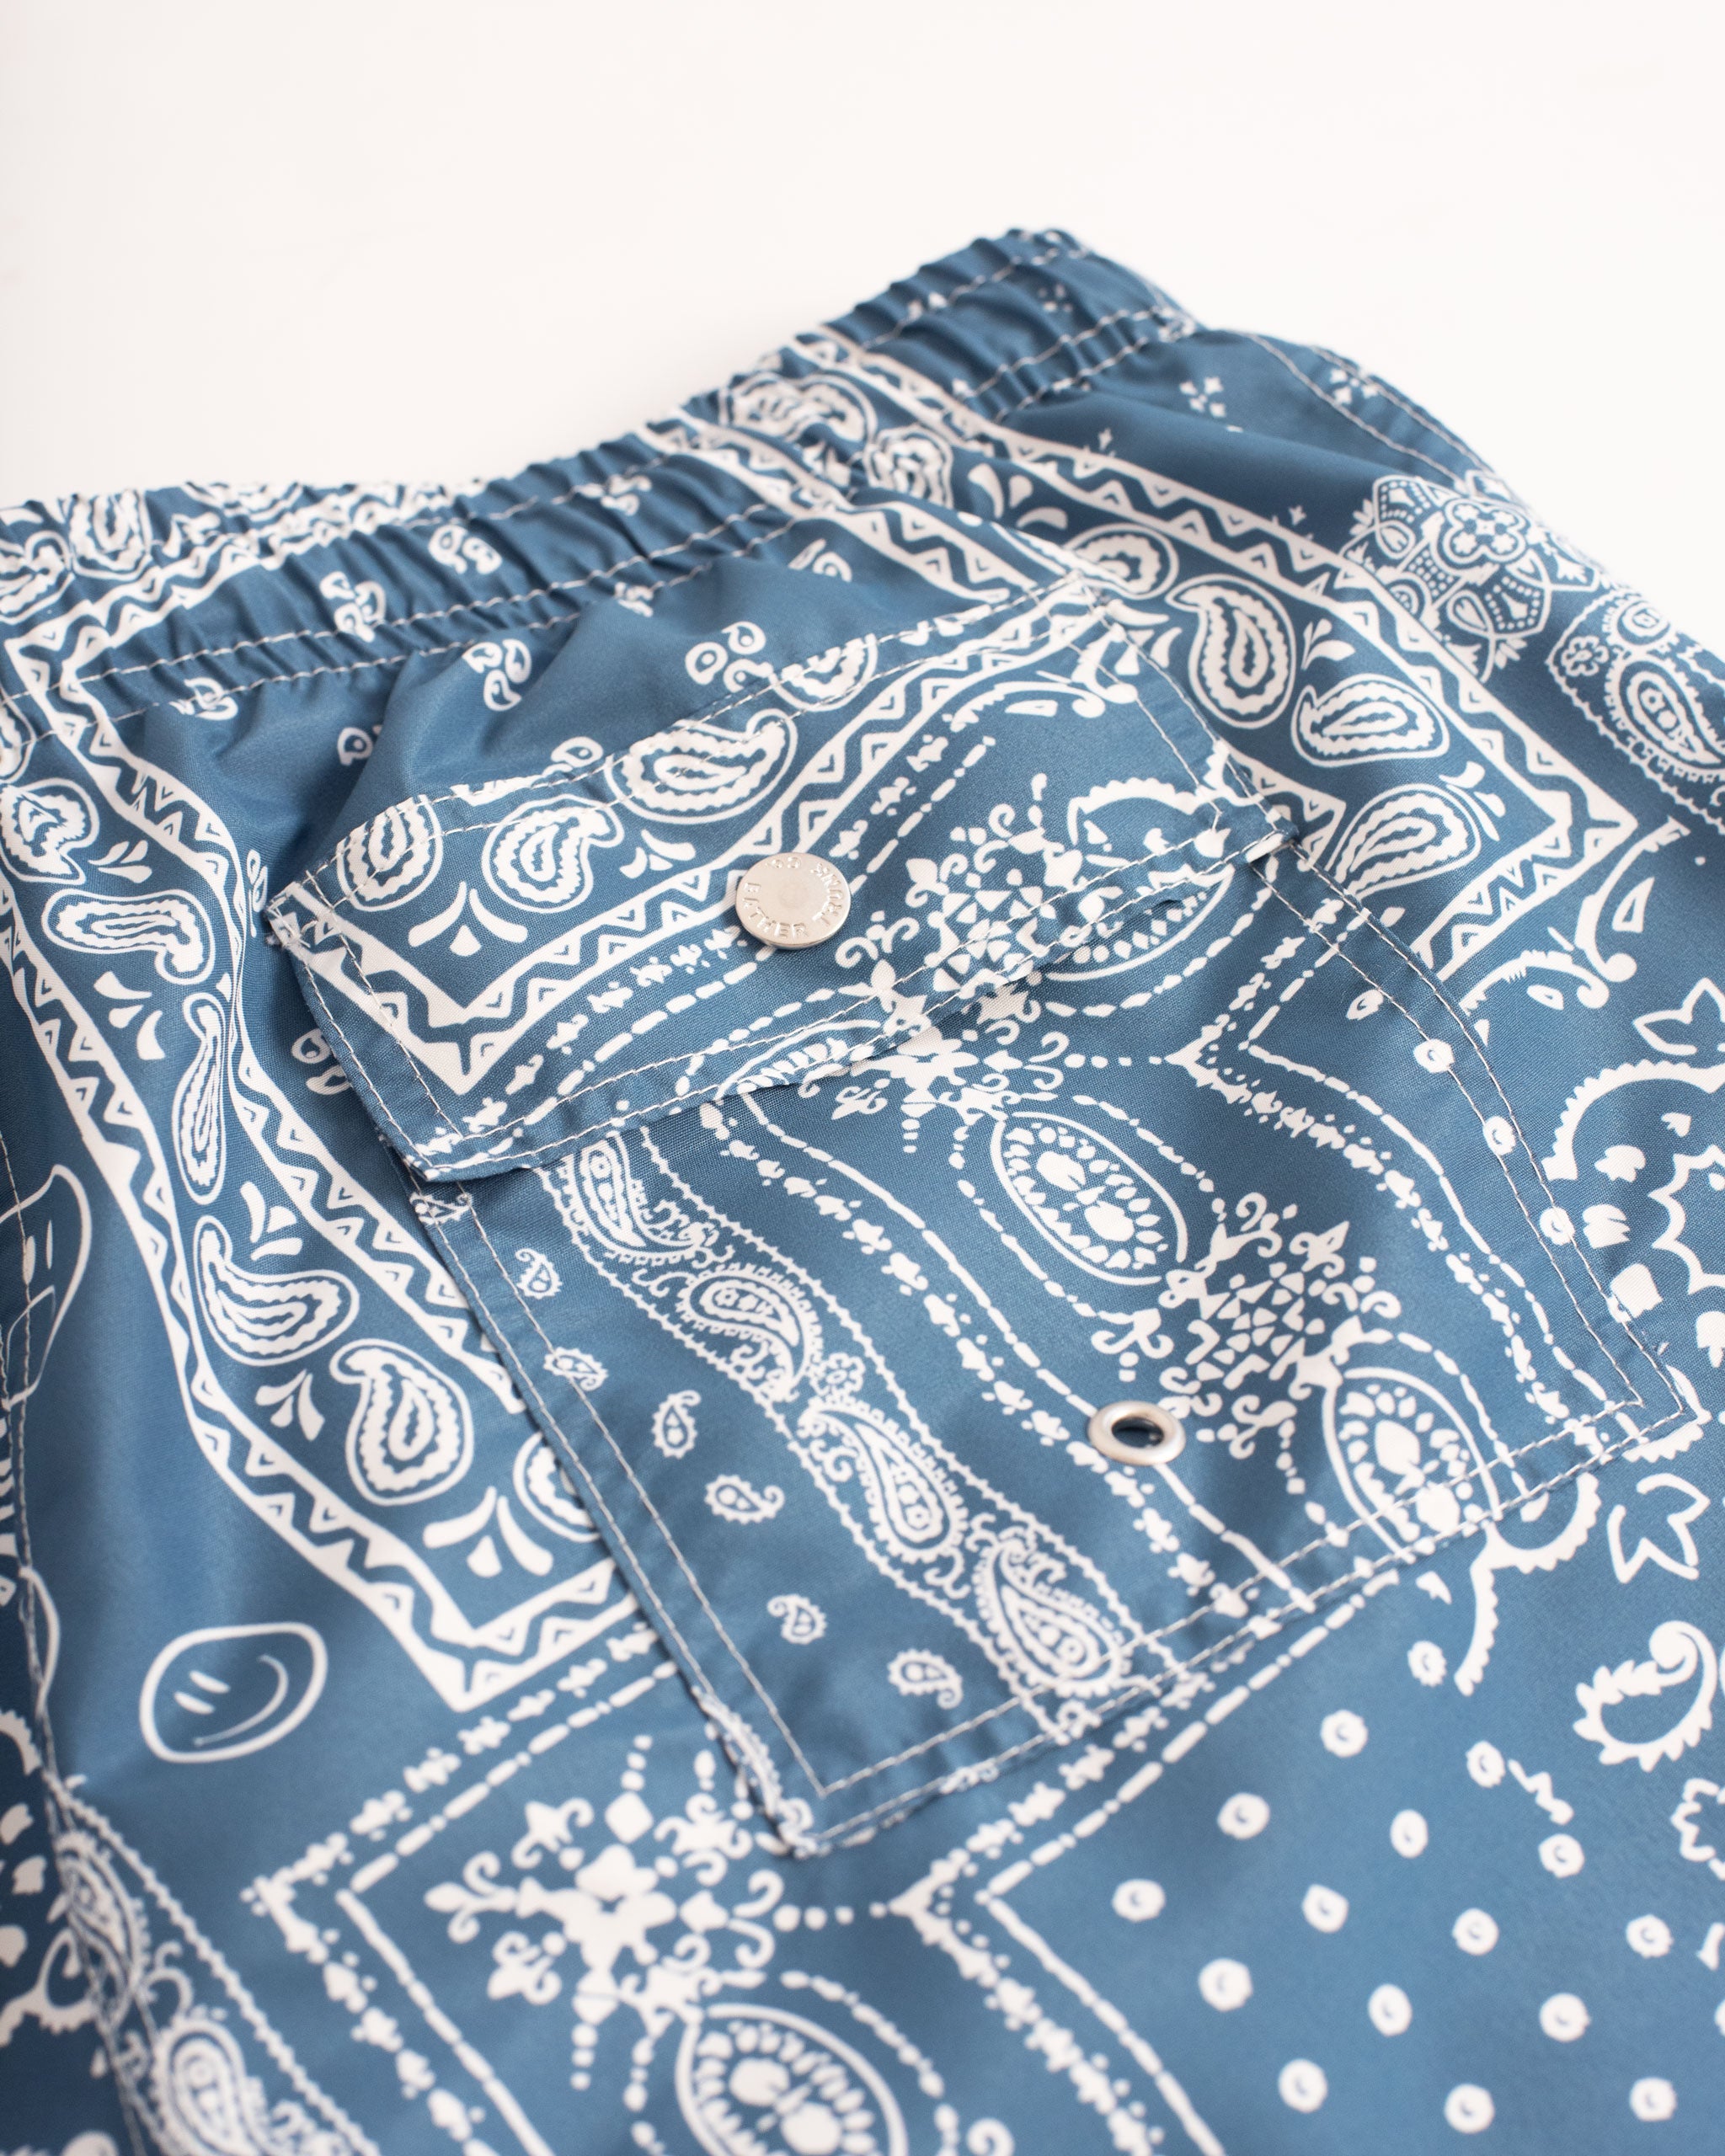 Back pocket close up of Blue swim trunk with all-over bandana print